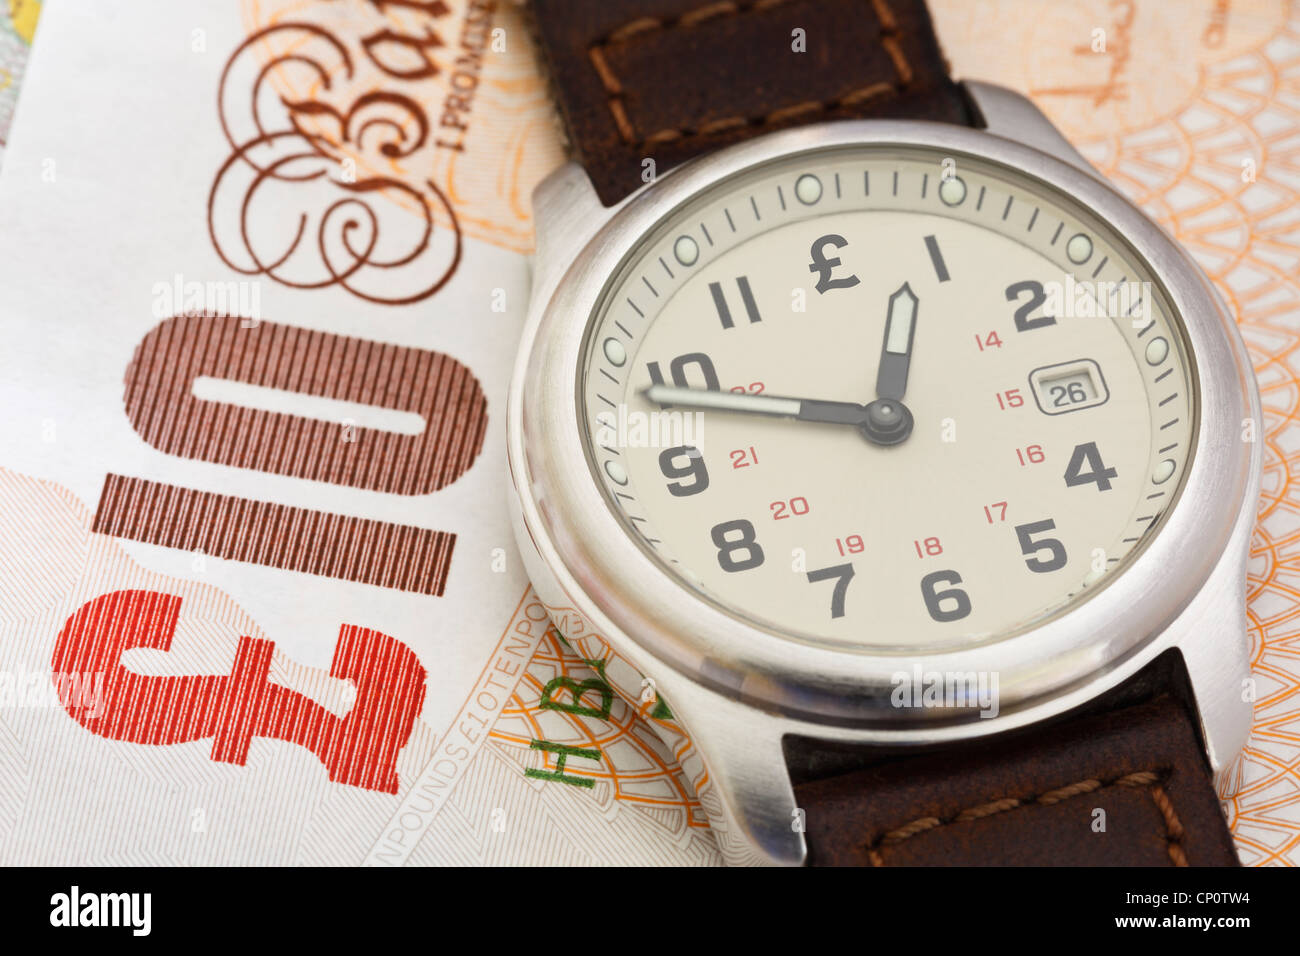 Wristwatch clock on a Sterling ten pound note GBP to illustrate time to put money in a pension concept. England, UK, Britain Stock Photo